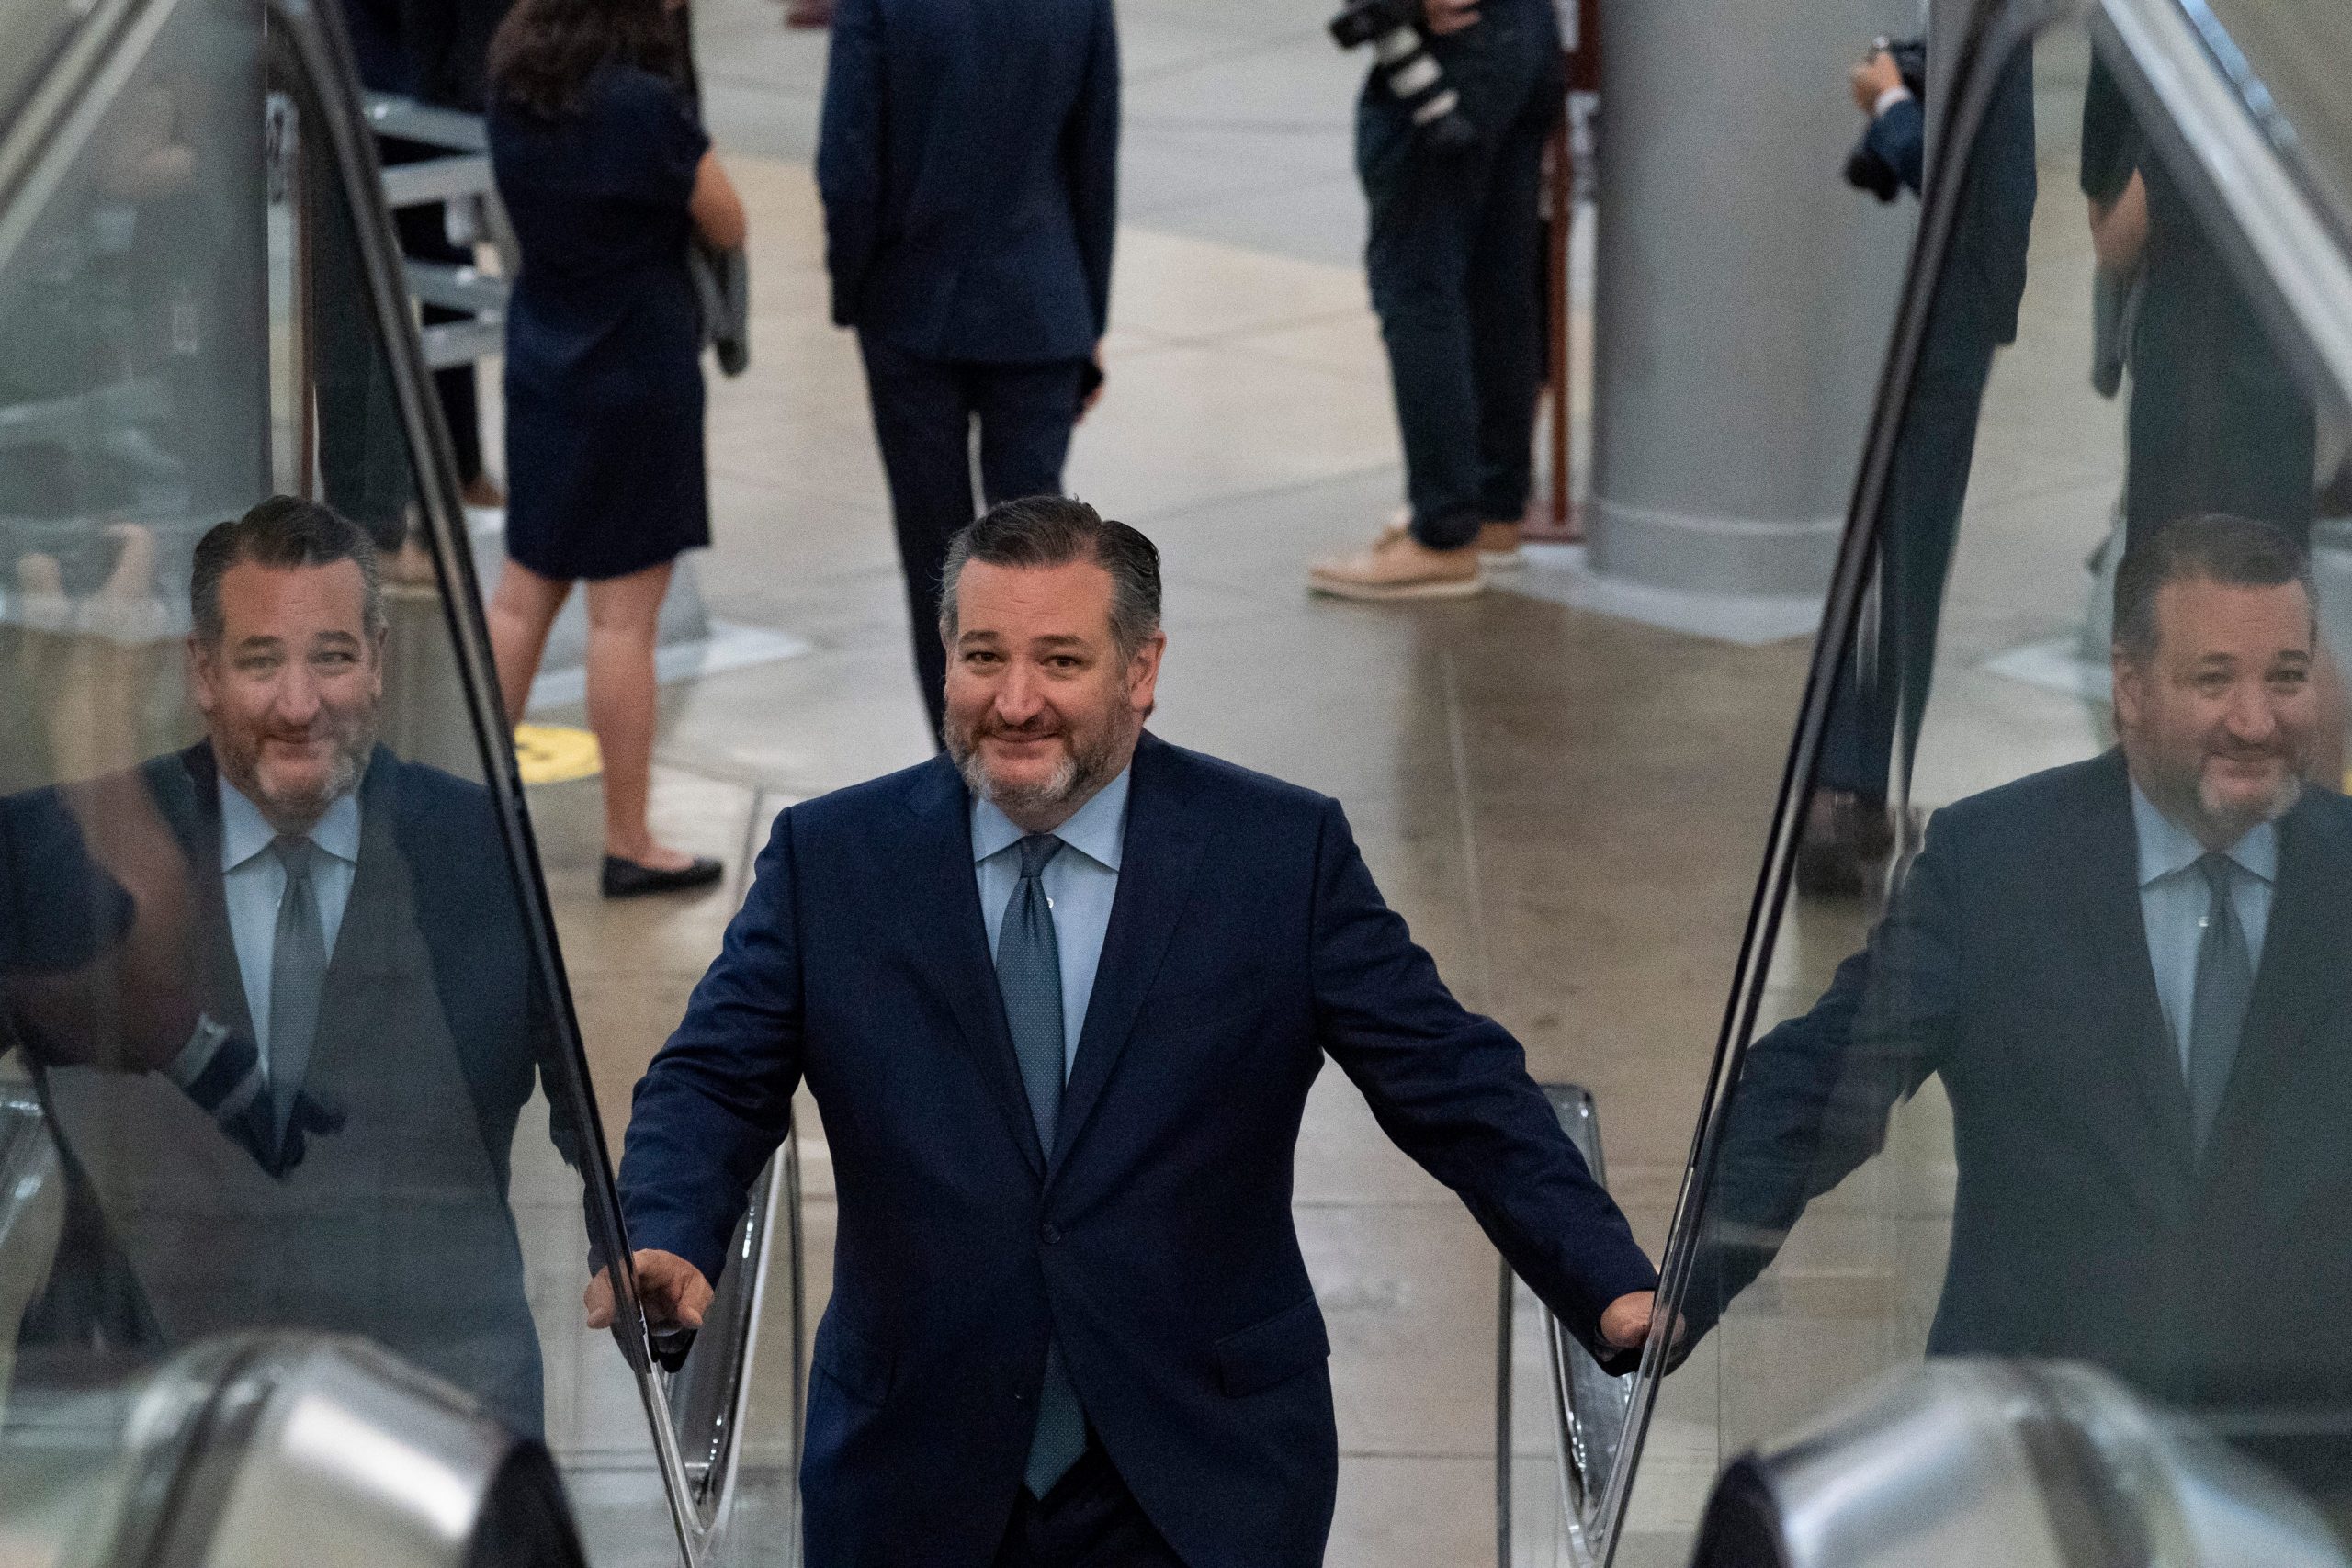 Senator Ted Cruz without a mask on an escalator in the US Capitol